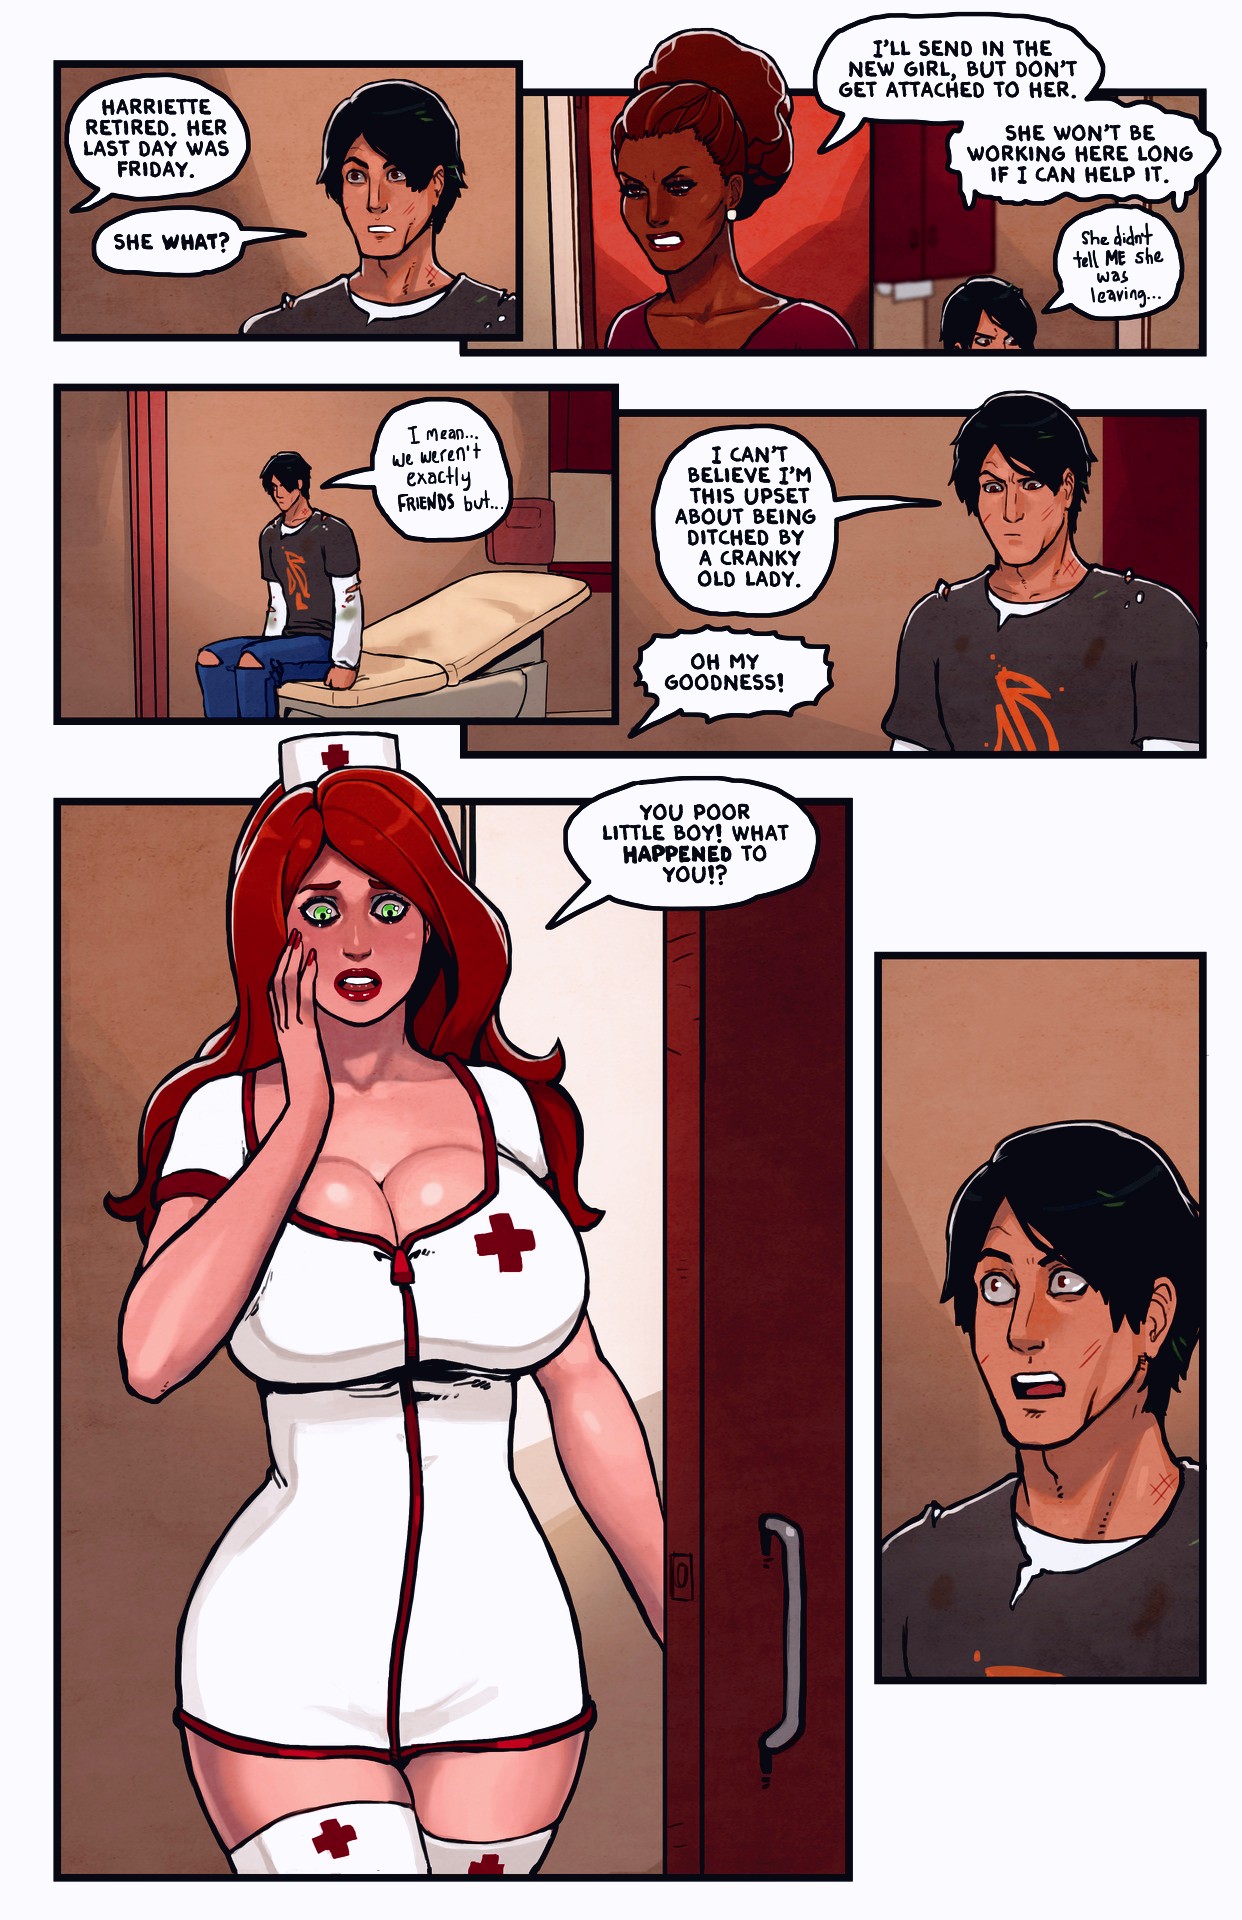 This Romantic World page 040